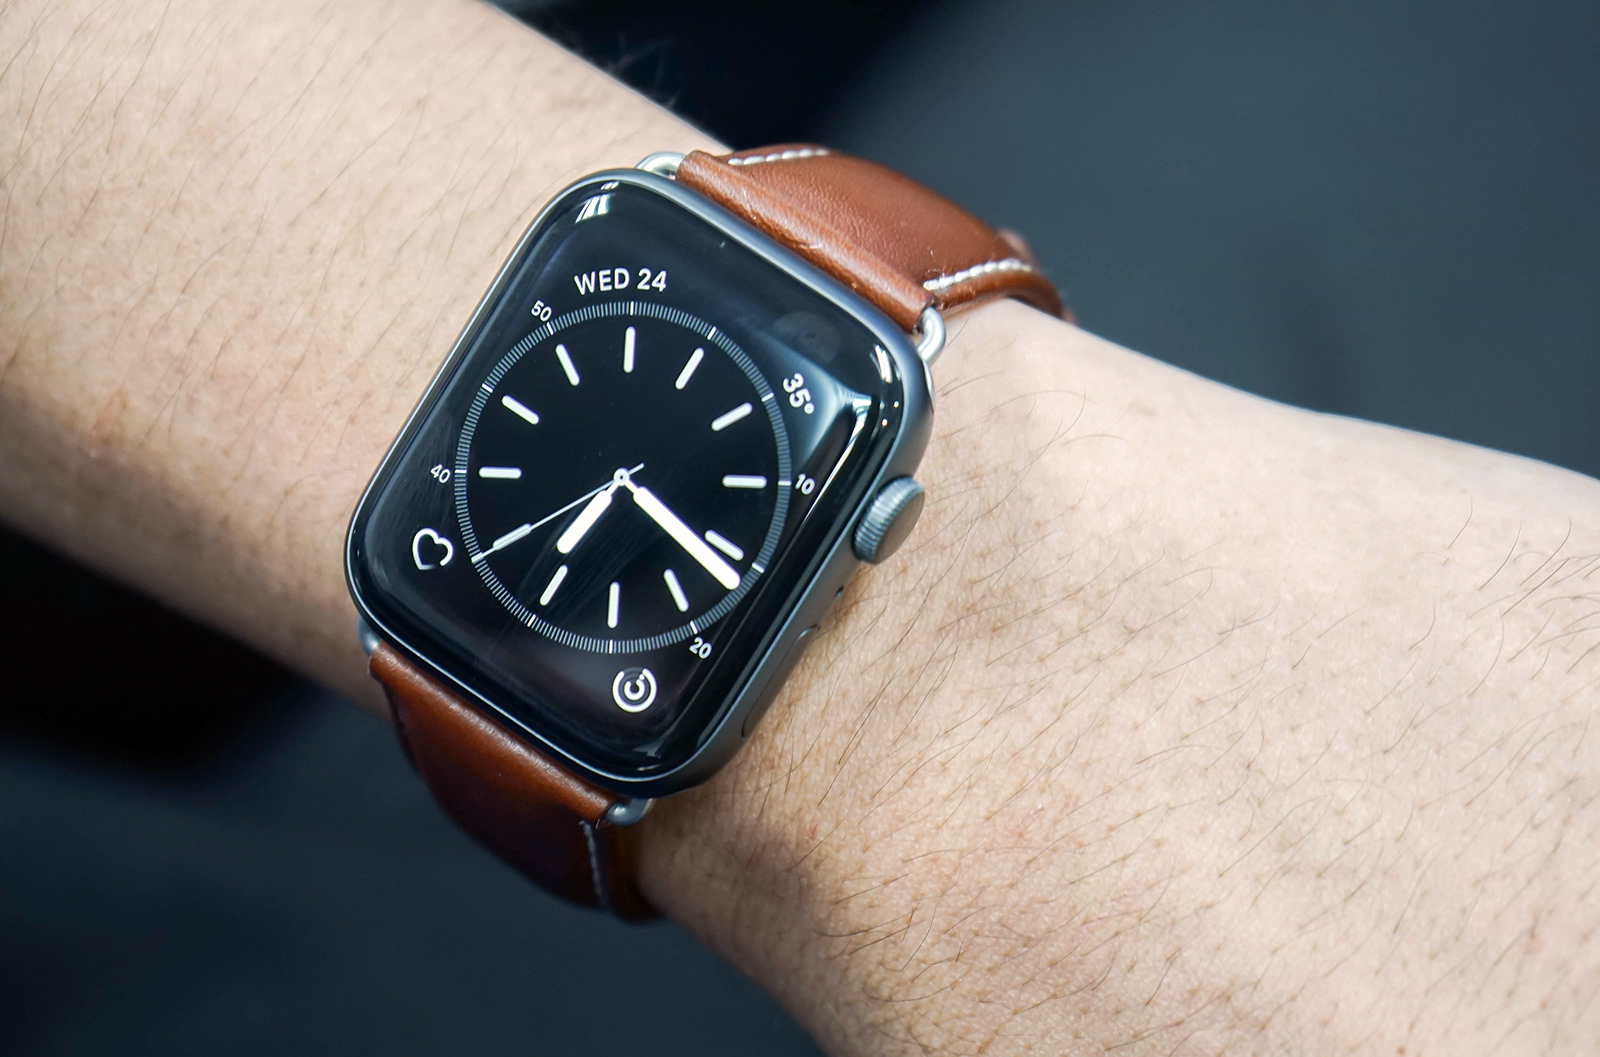 Haute couture for your Apple Watch - The Gadgeteer